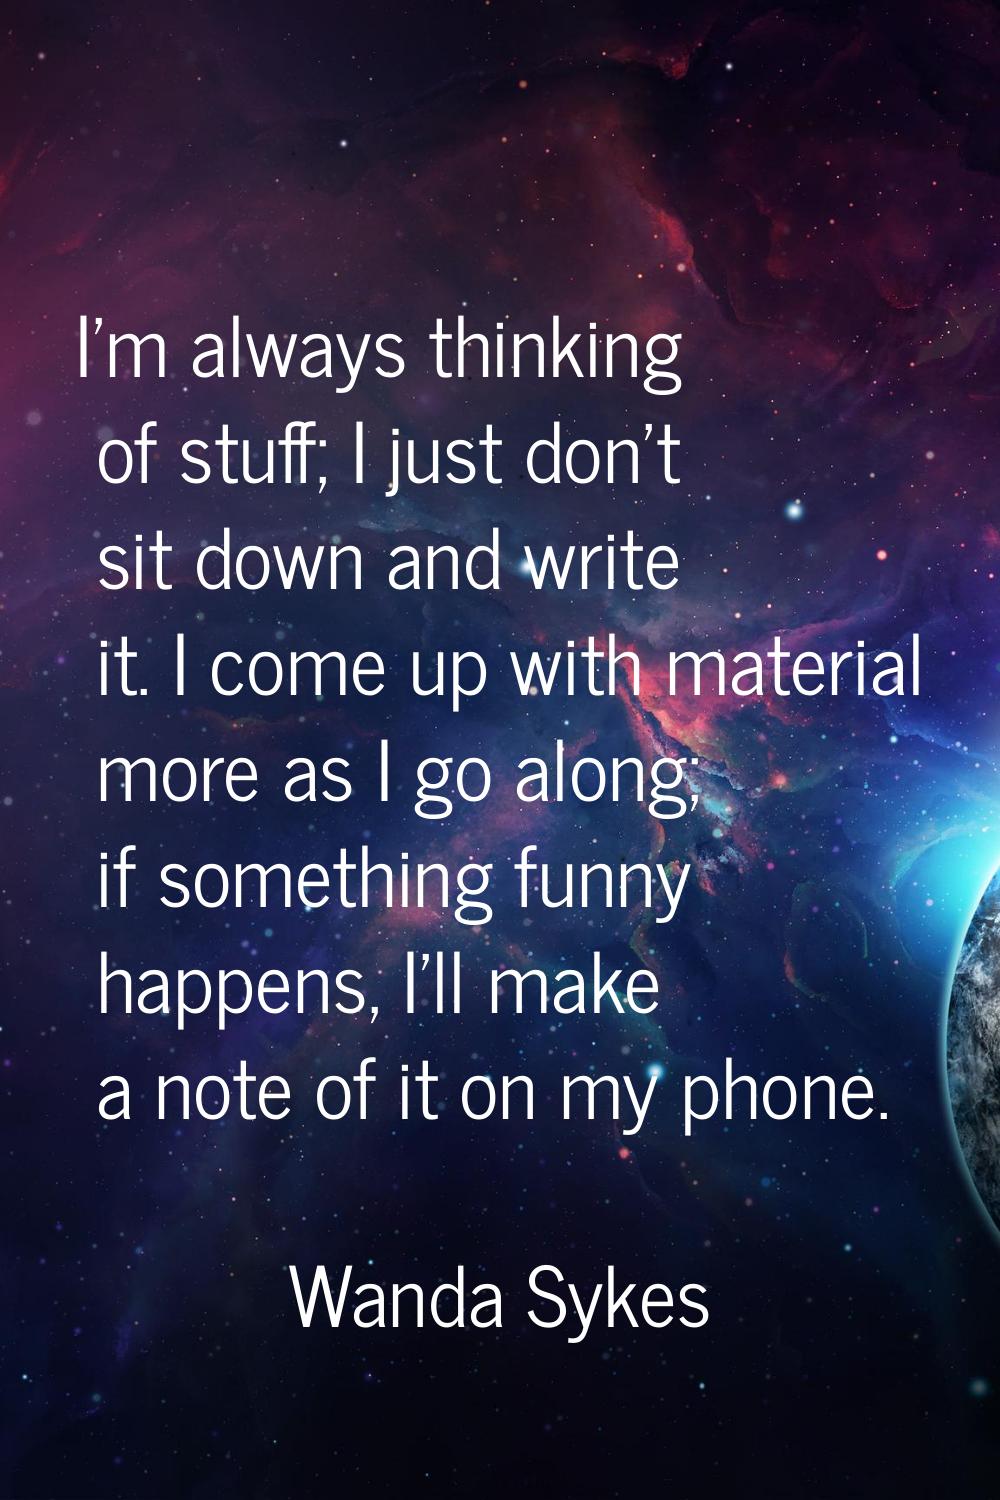 I'm always thinking of stuff; I just don't sit down and write it. I come up with material more as I